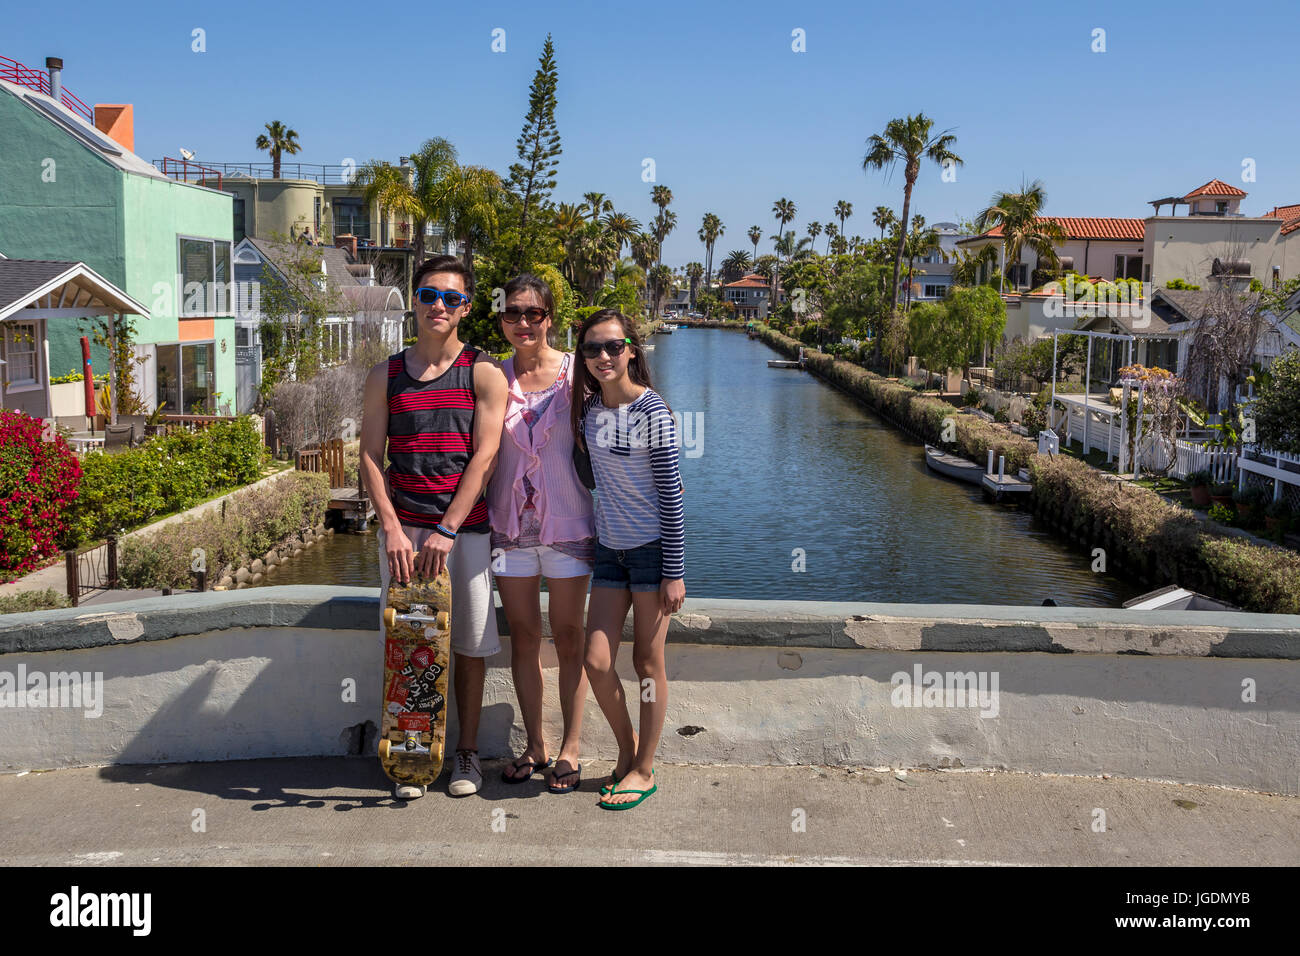 people, tourists, visitors, visiting, canal, Venice Canals, Venice Canal Historic District, Venice, Los Angeles, California, United States Stock Photo